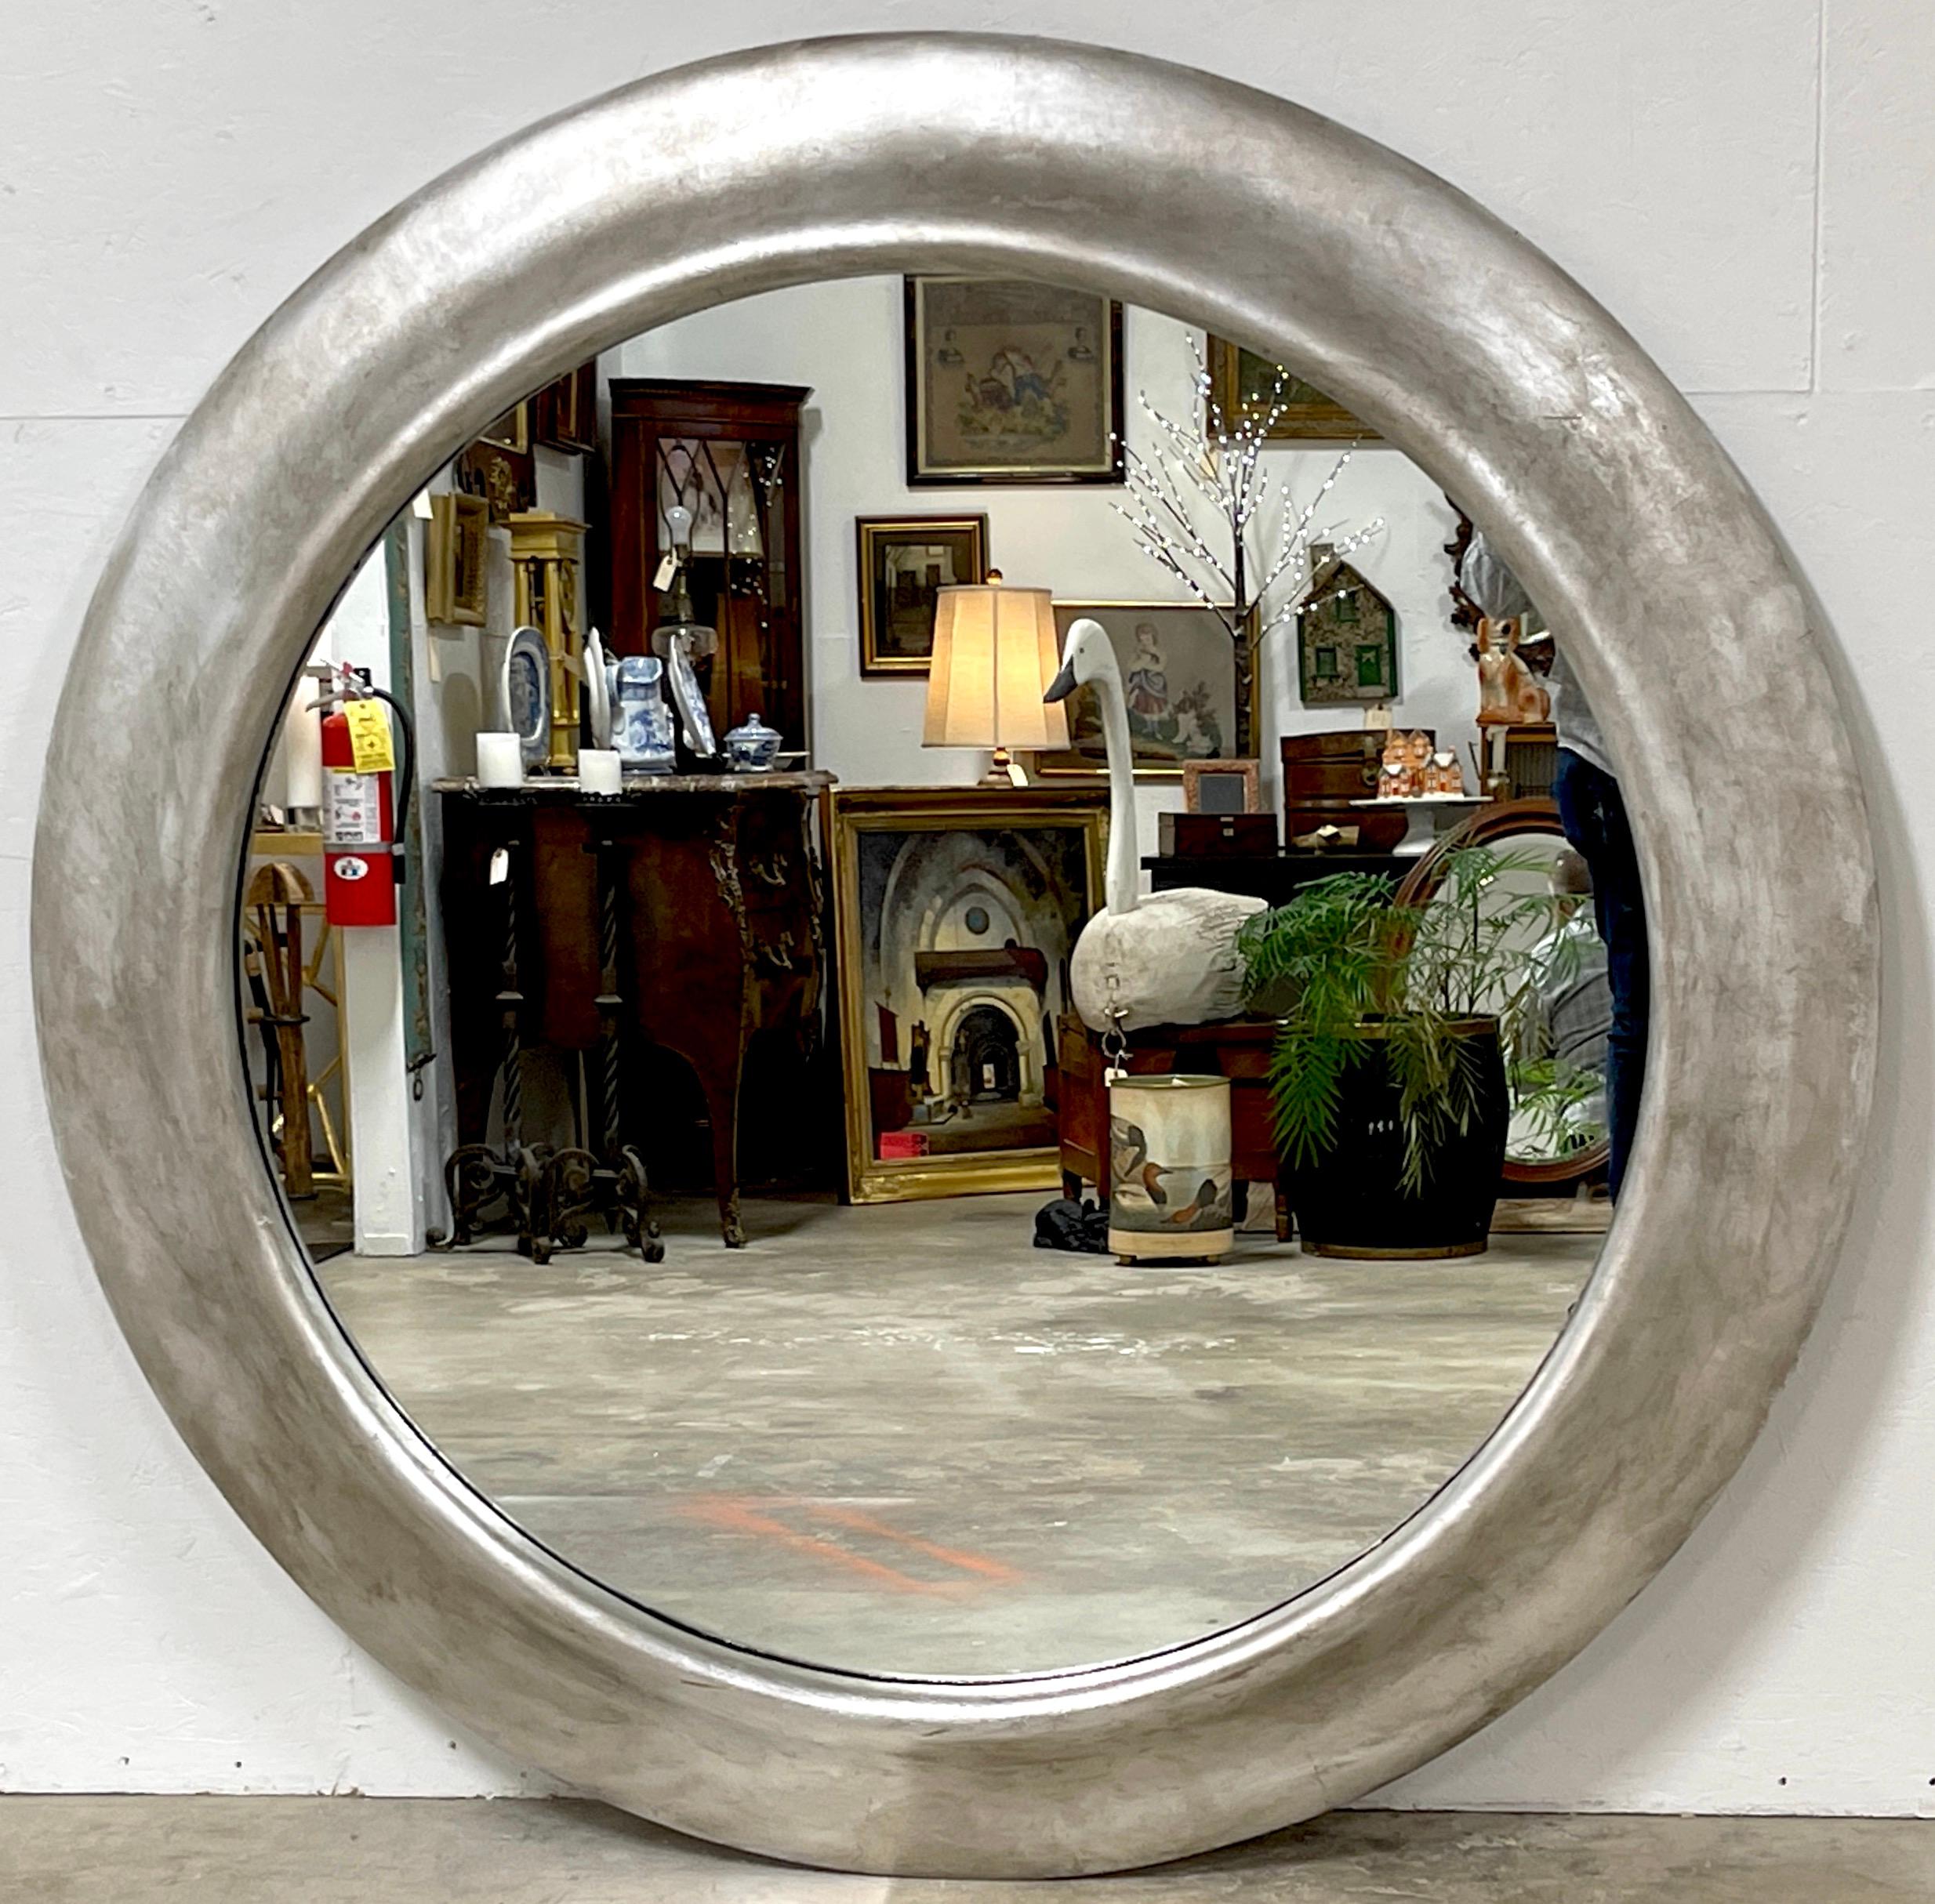 Monumental French Modern Silverleaf  Round Mirror
Purchased in France 1970s
A rare find, we are please to offer this stunning large scale French Modern silver-leaf  round mirror. 
The 58- Inch diameter  sleek rounded oblique silver-leaf (7-Inches